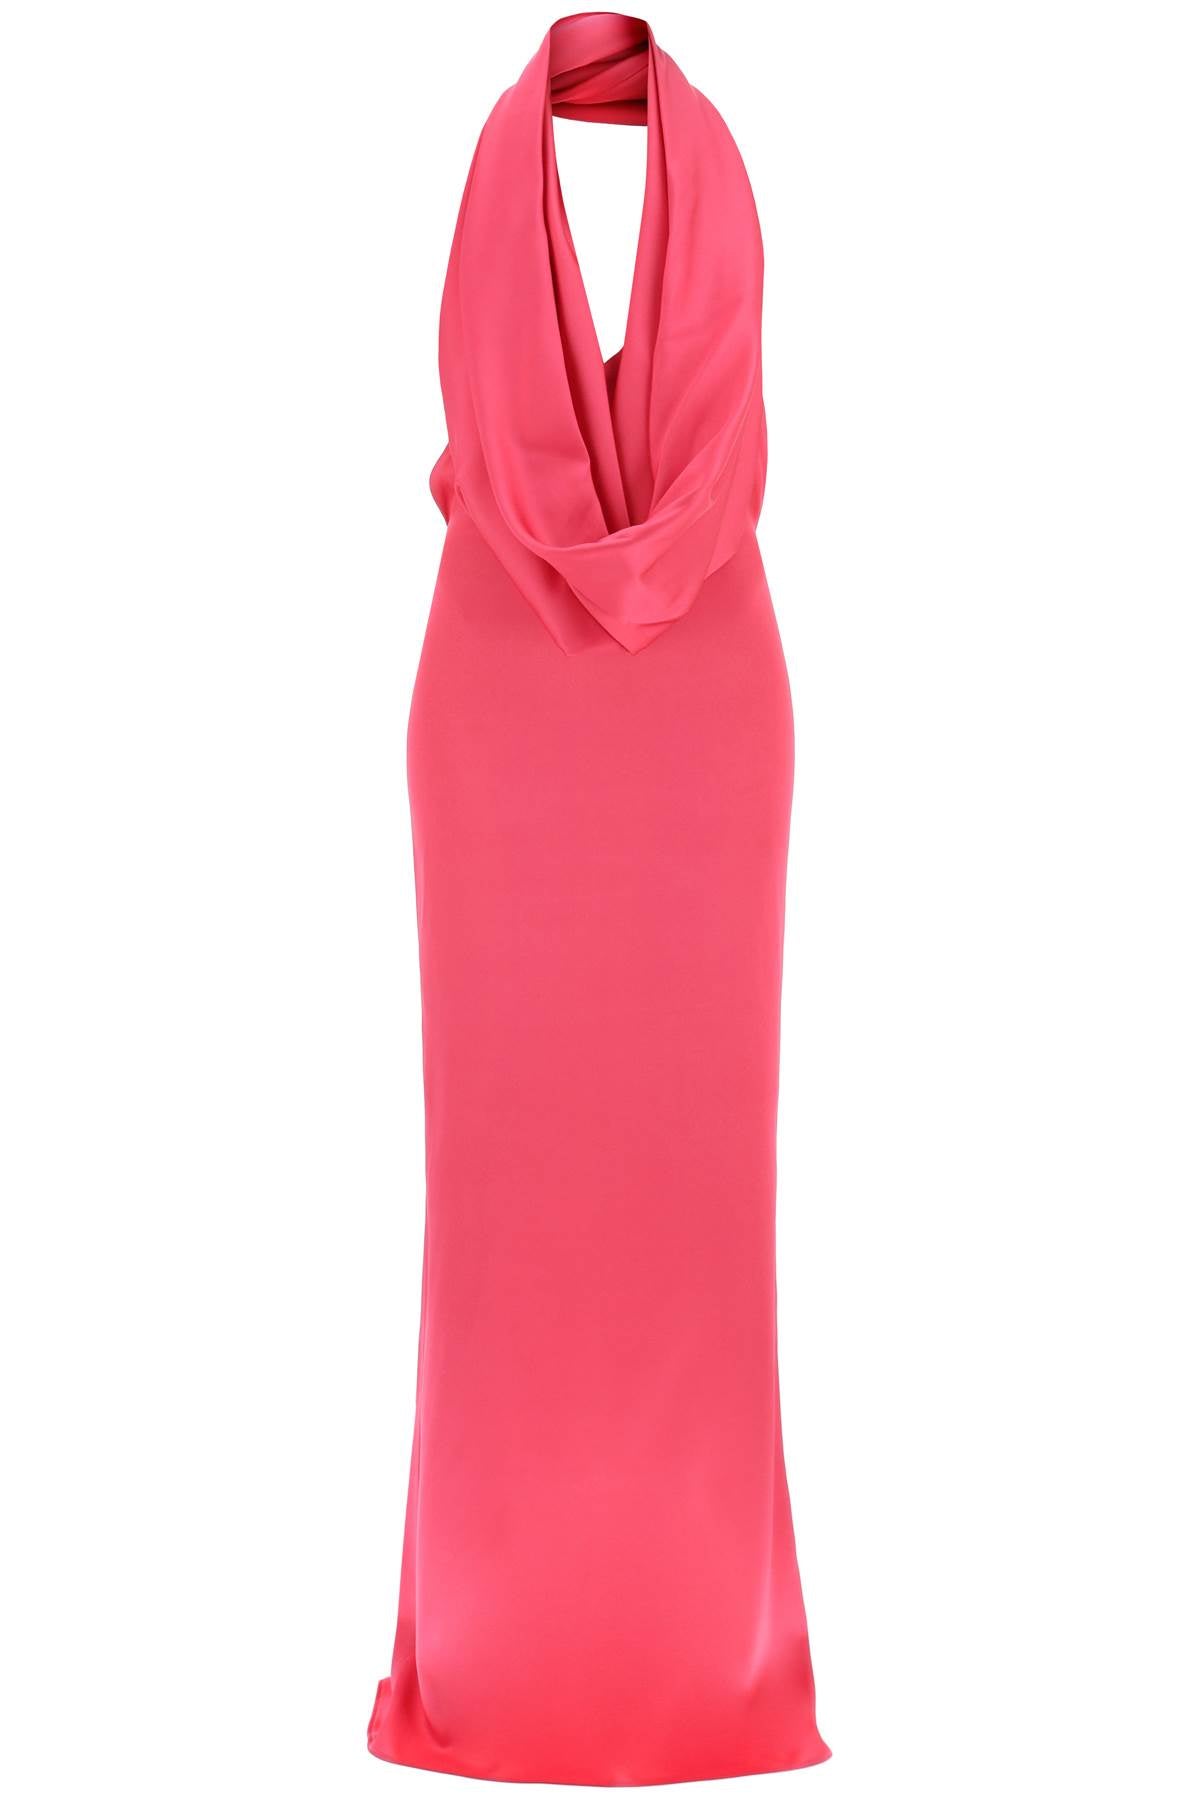 Giuseppe di morabito maxi gown with built-in hood-0